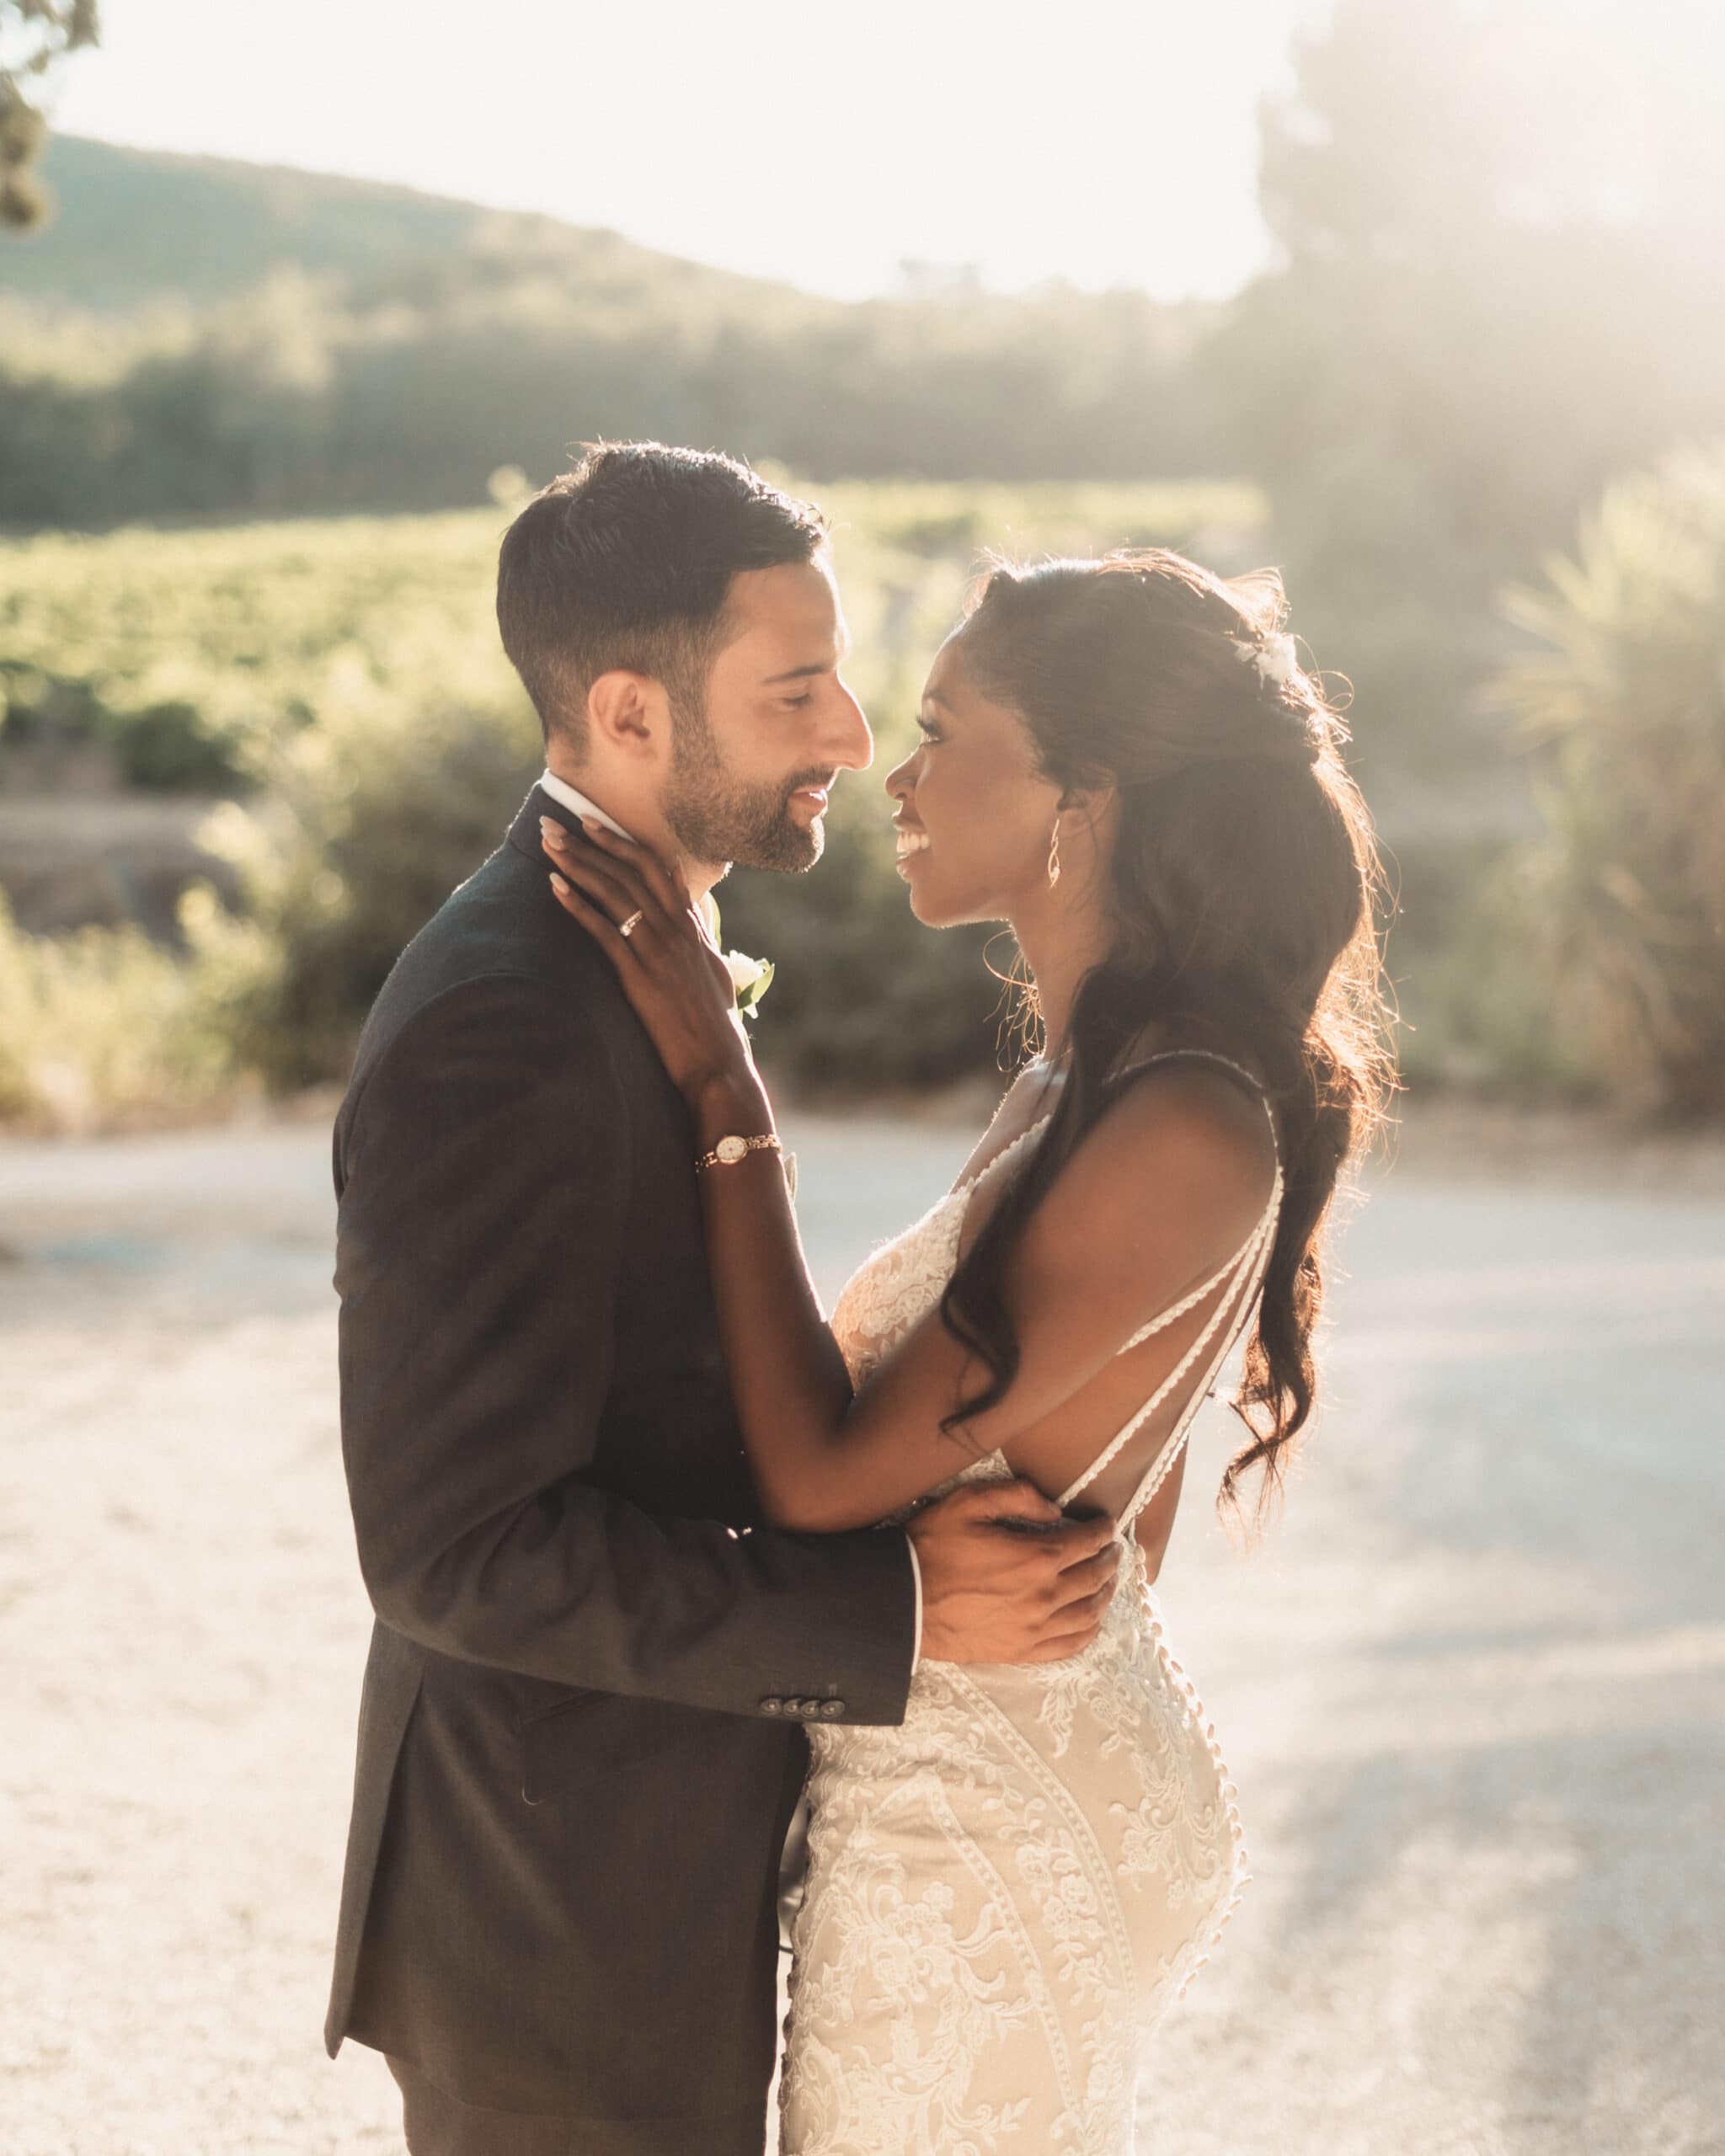 Why book a ‘wedding photographer near me? Wildly in Love